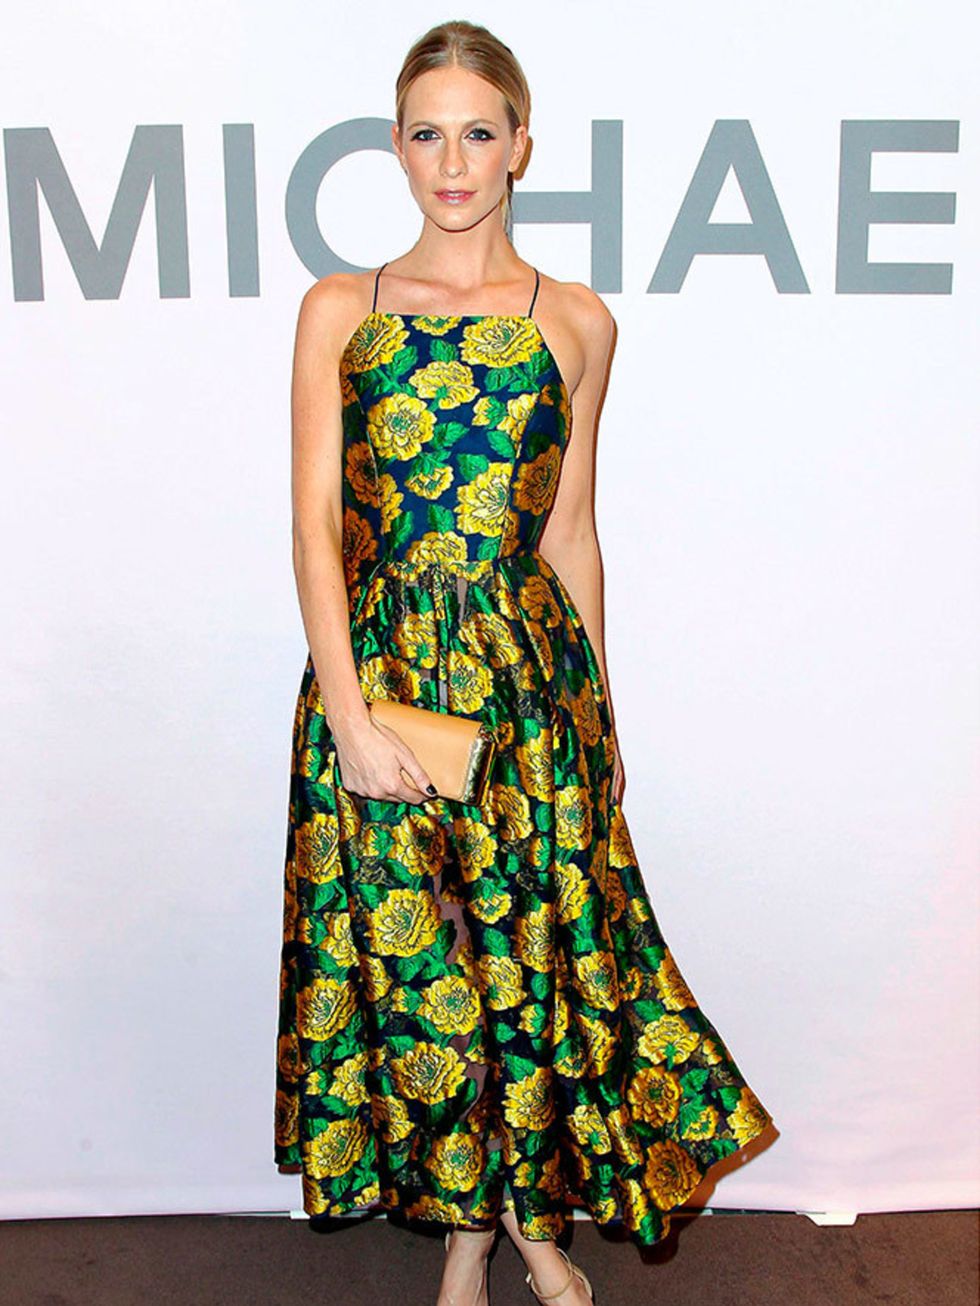 Poppy Delevingne attends the Michael Kors Miranda Eyewear Collection launch party, New York 2015.